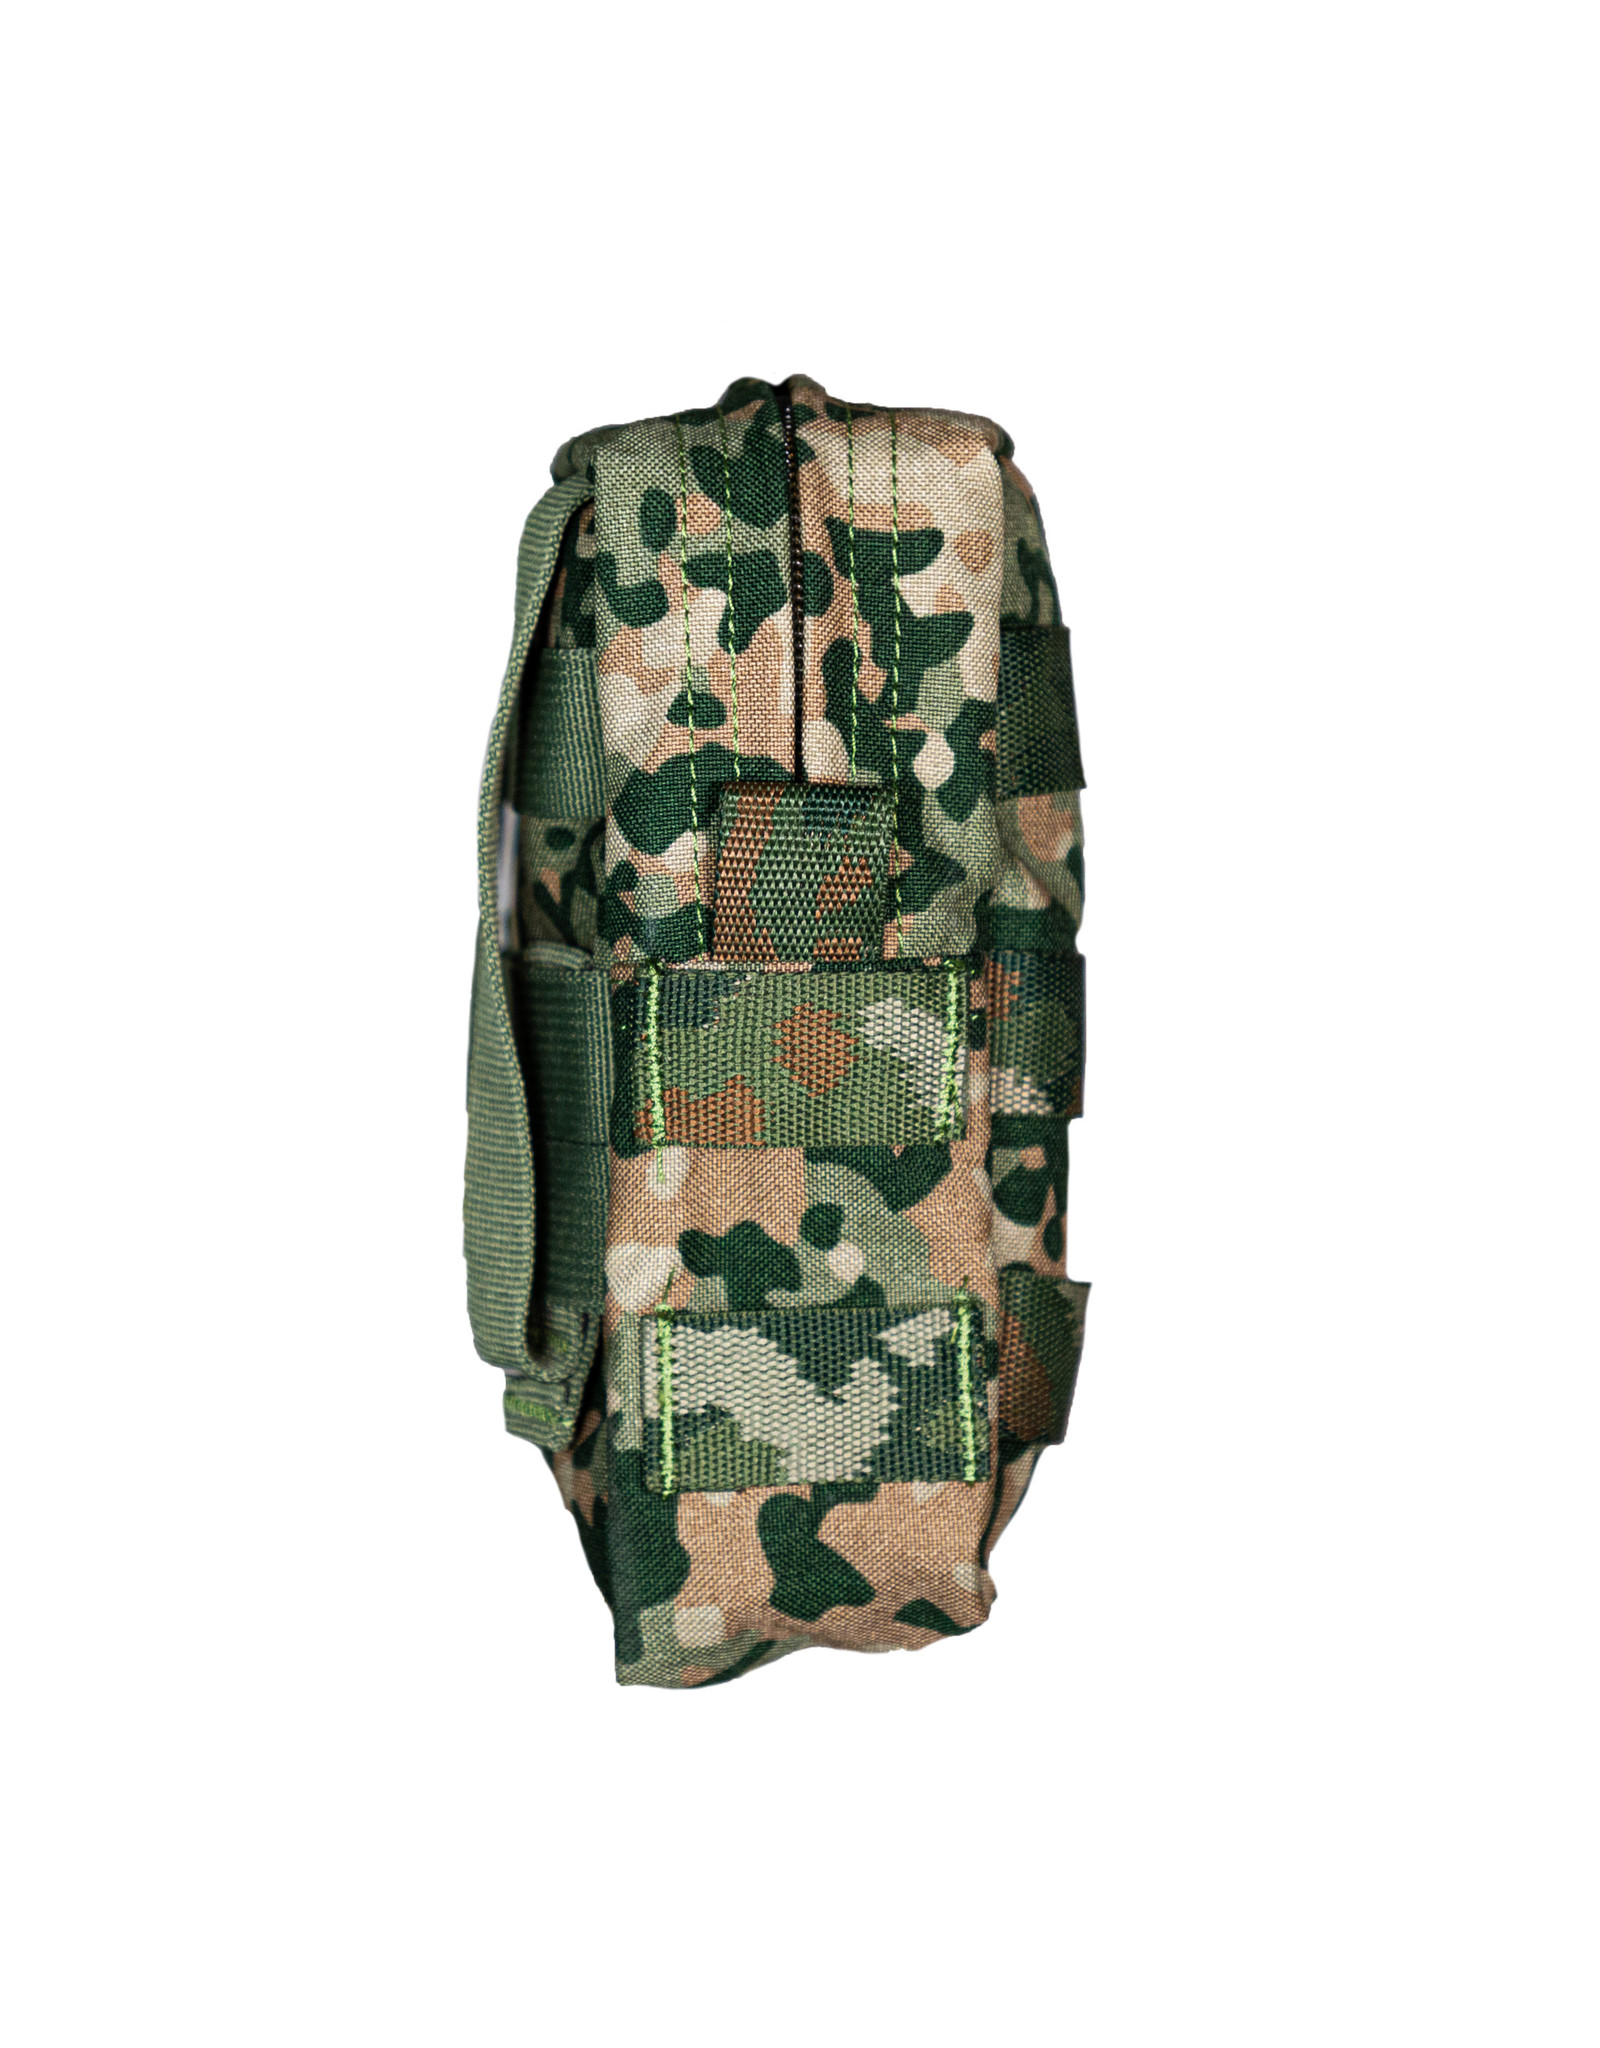 Dutch Tactical Gear Small Molle Utility Pouch - NFP